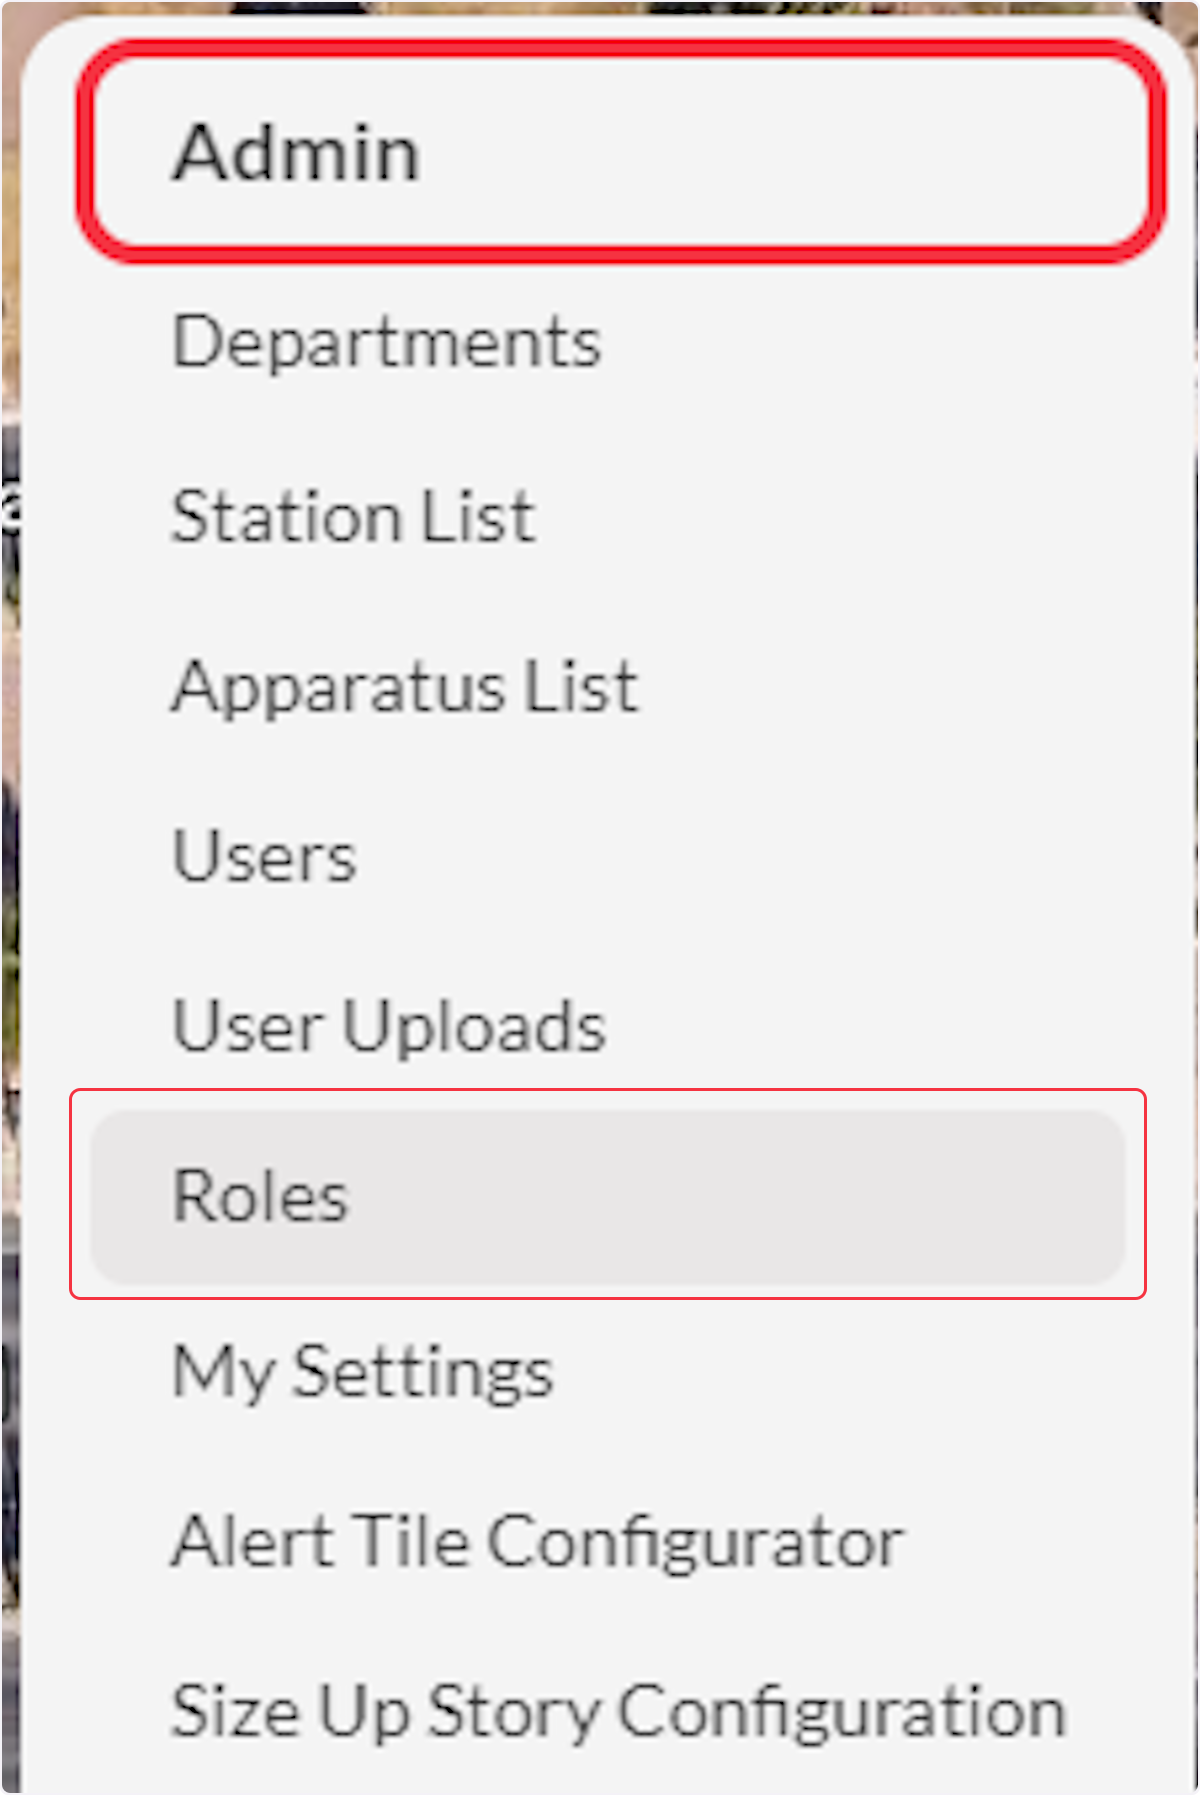 Navigate to Admin then click on Roles.